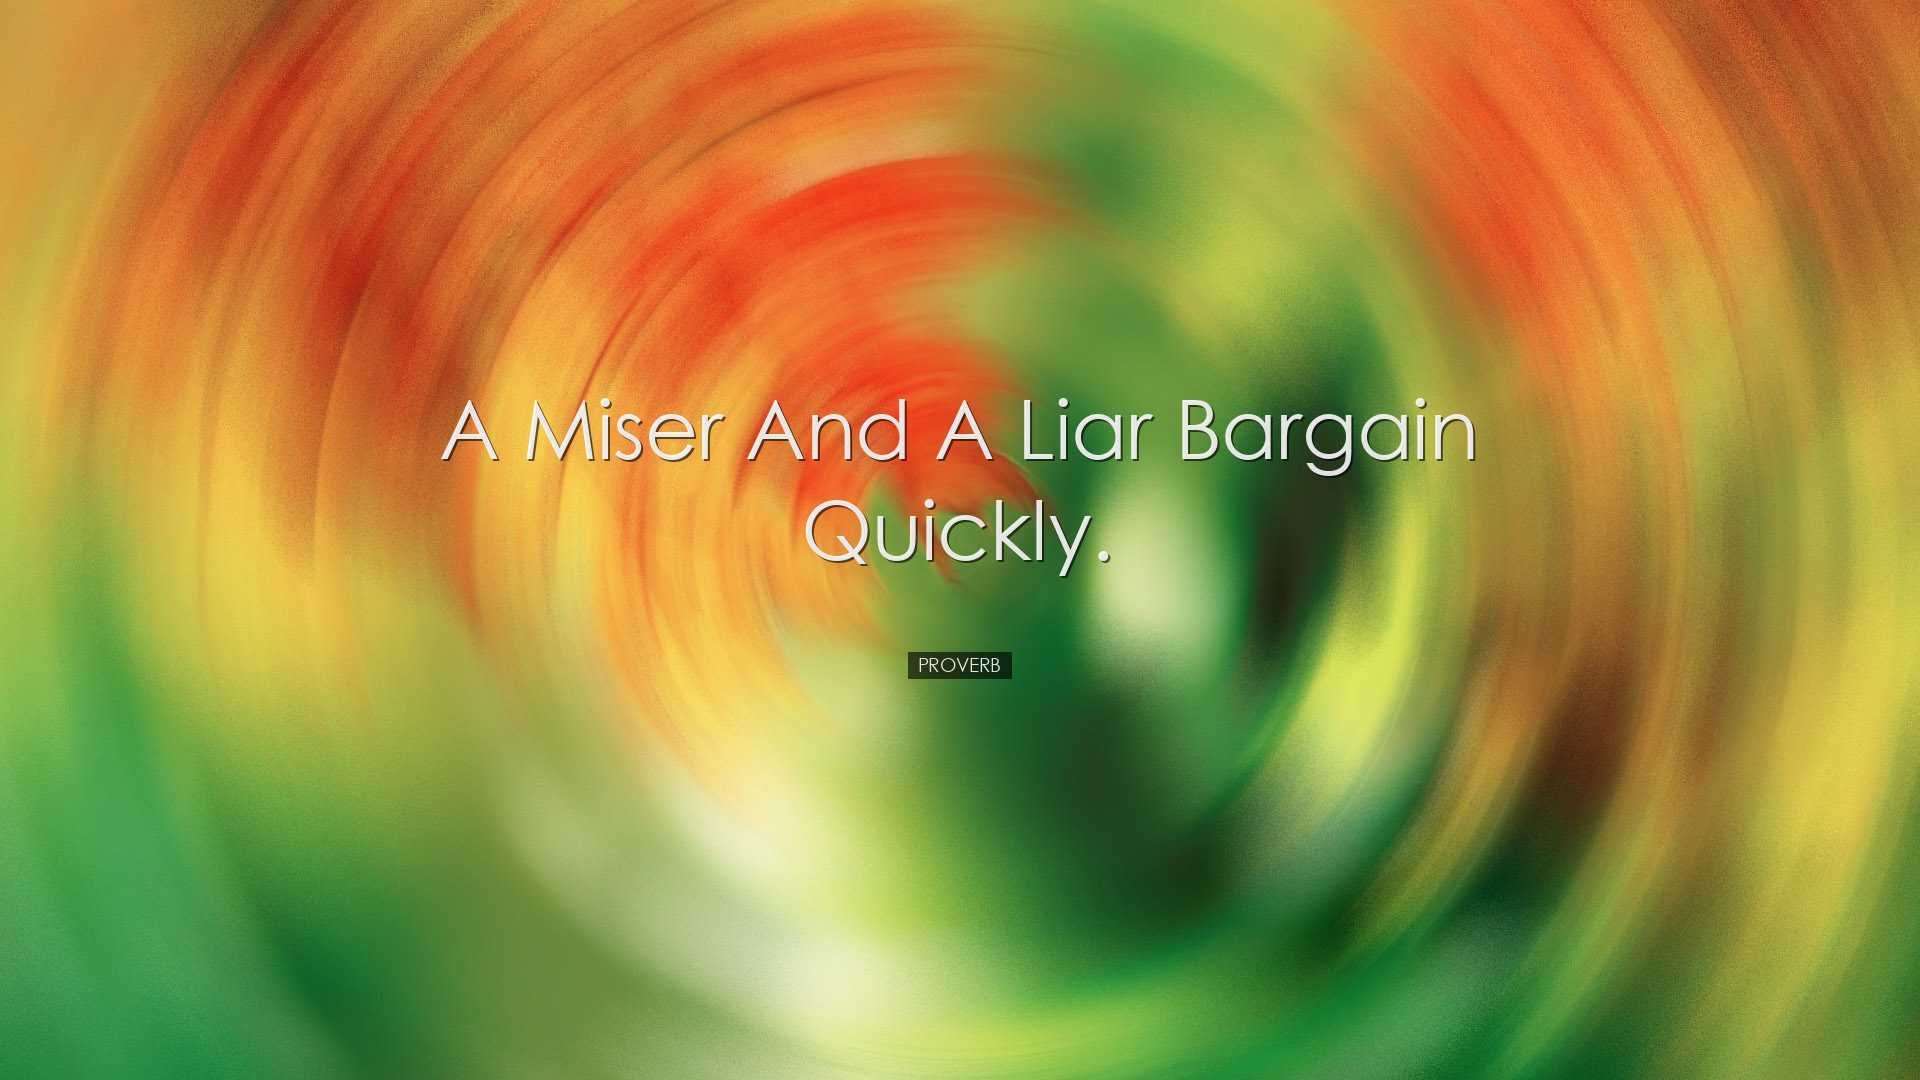 A miser and a liar bargain quickly. - Proverb